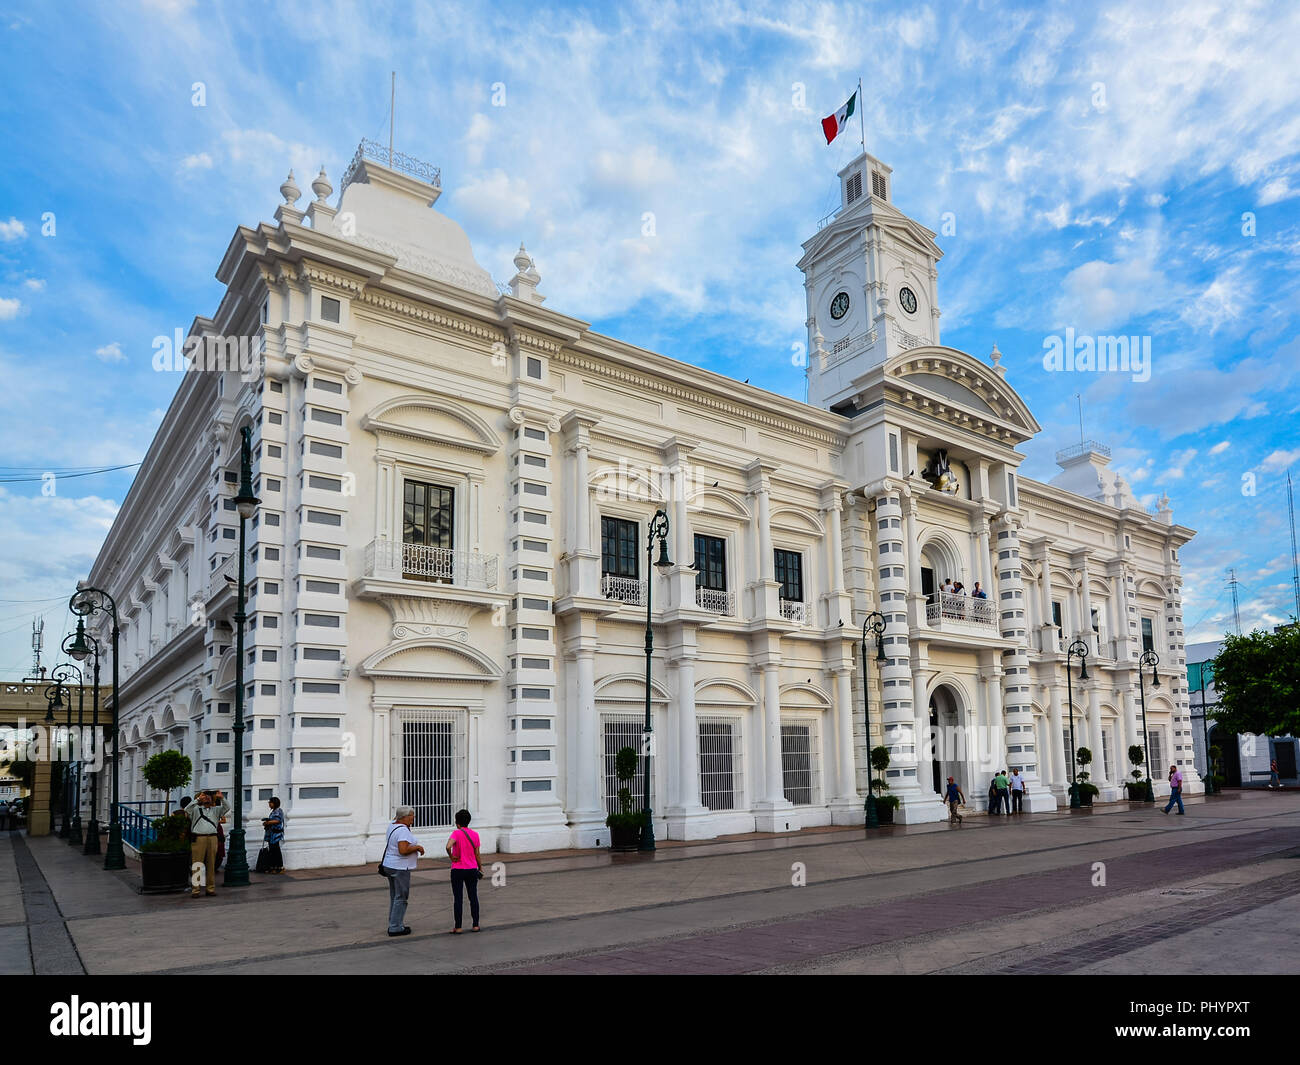 Hermosillo, Mexico - Oct. 28, 2016: Governor's Palace. This official residence of the governor of the state of Sonora, Mexico was built in the 1950s. Stock Photo